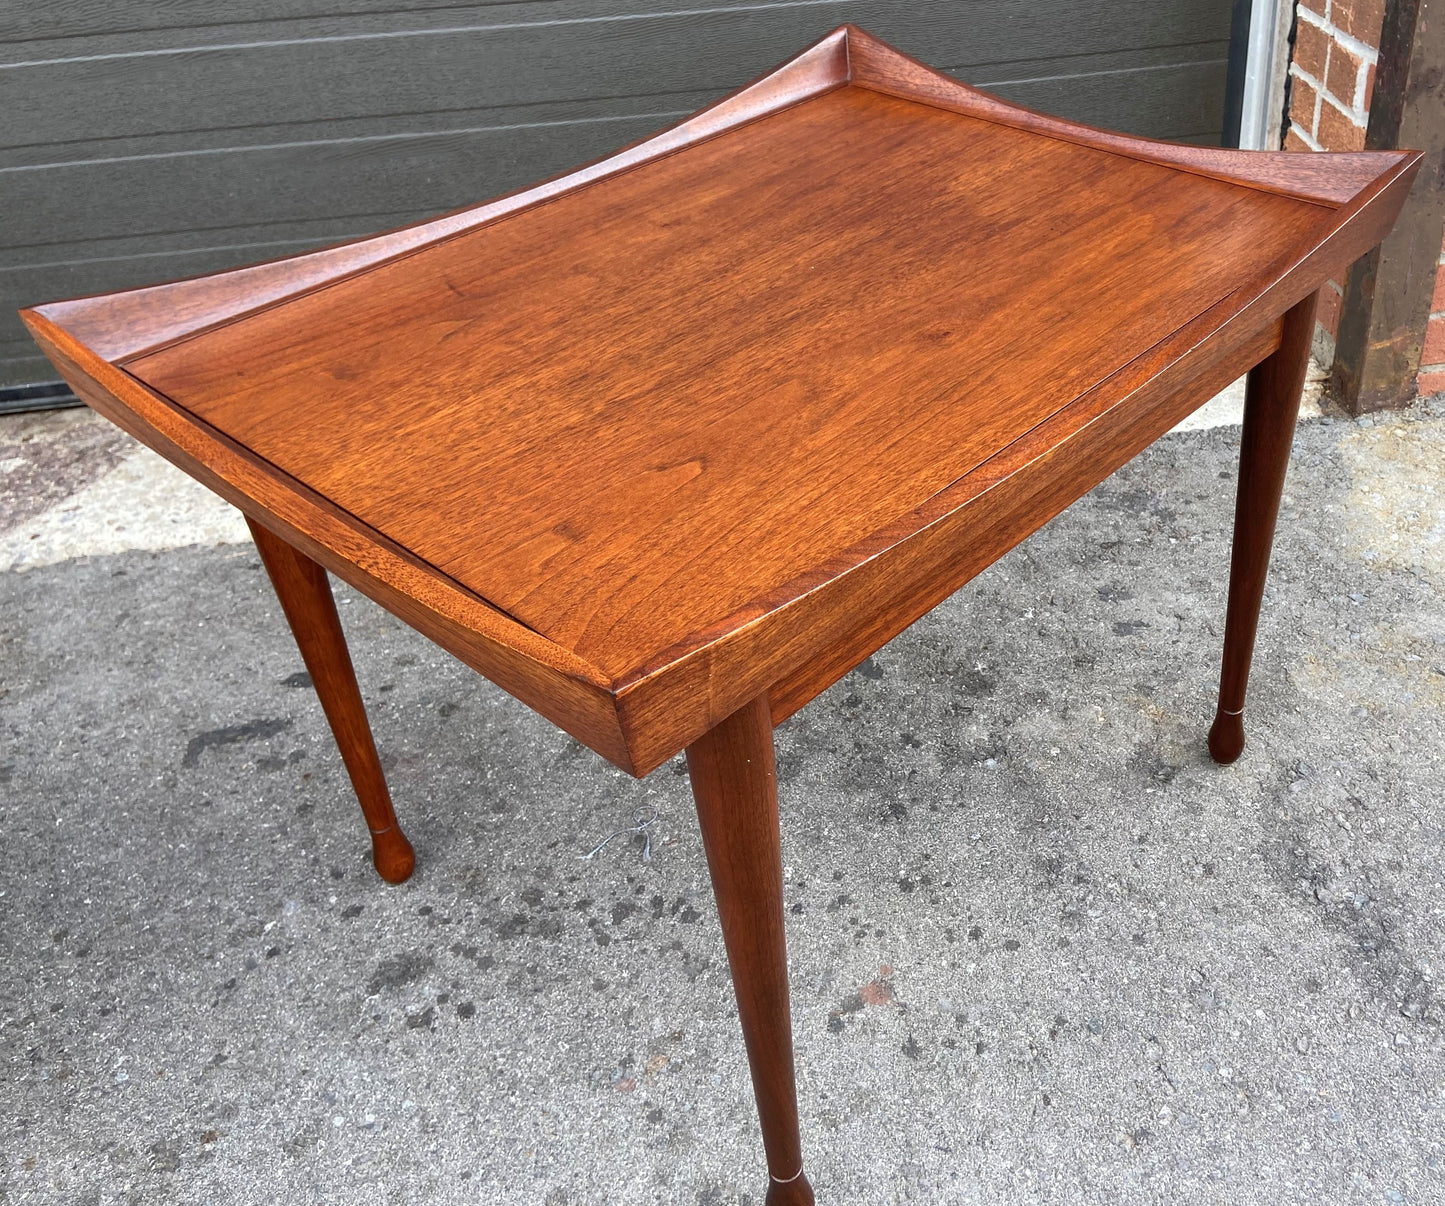 REFINISHED Mid Century Modern Walnut Accent Table by Deilcraft (only one is available)